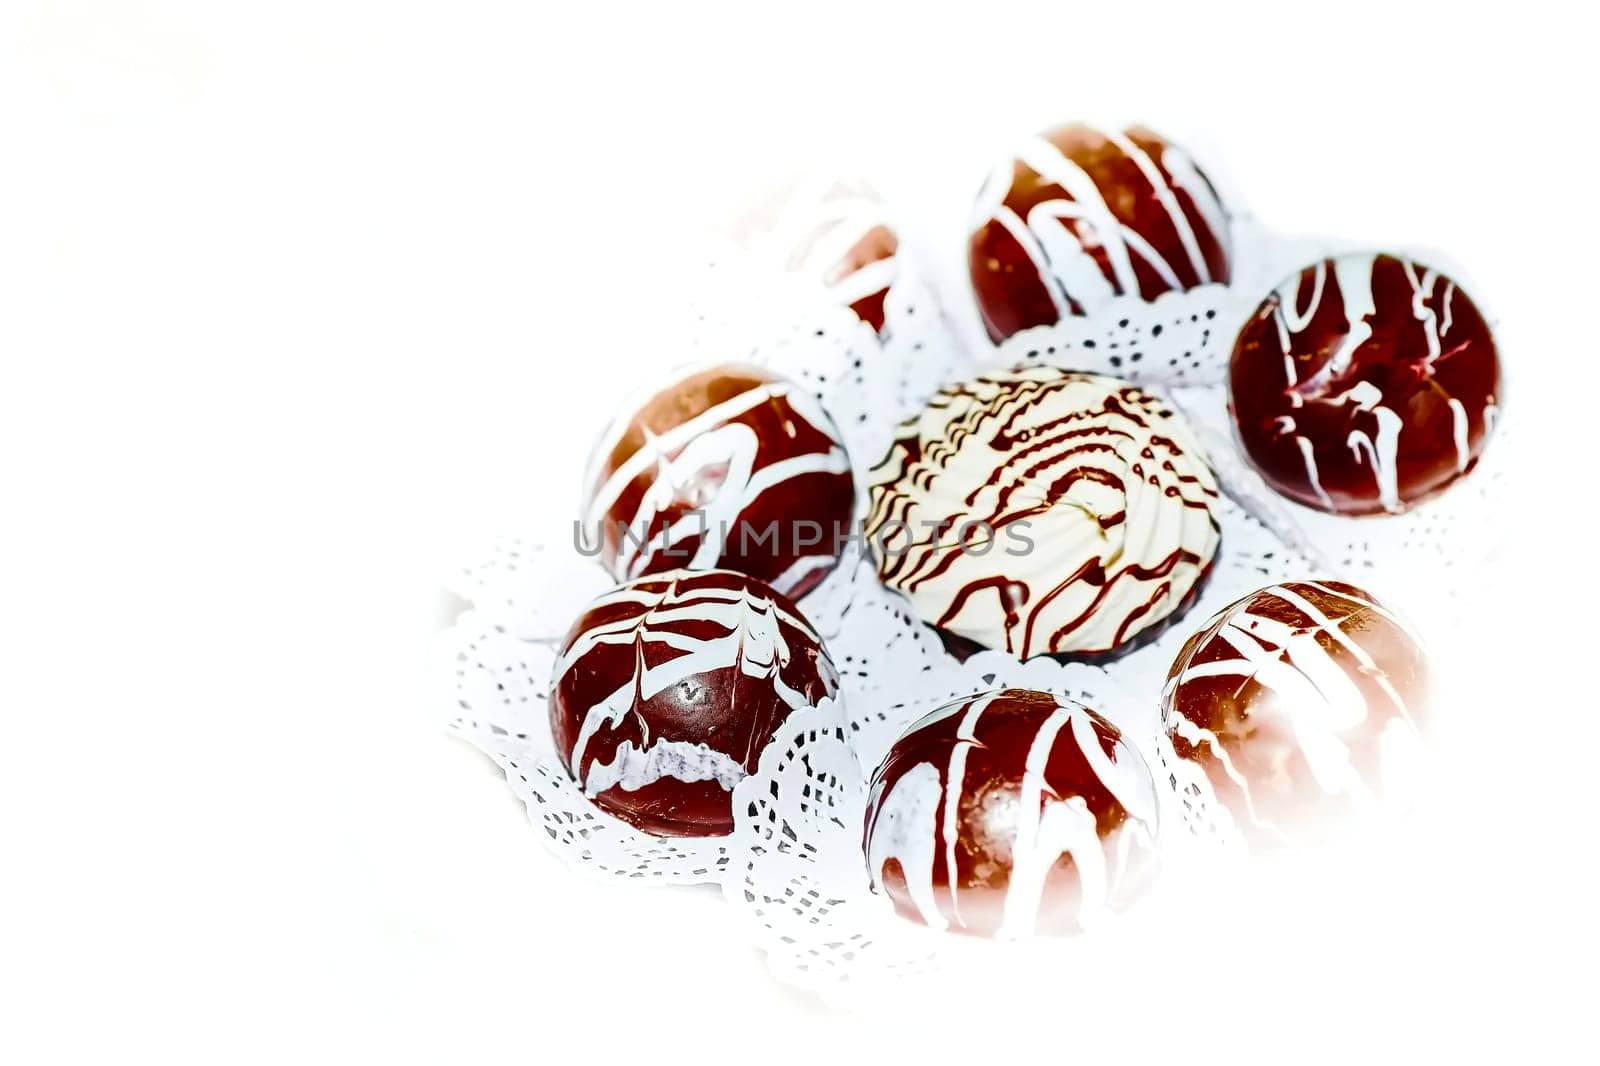 Set of round chocolate candies, decorated with lines of white cream by jovani68